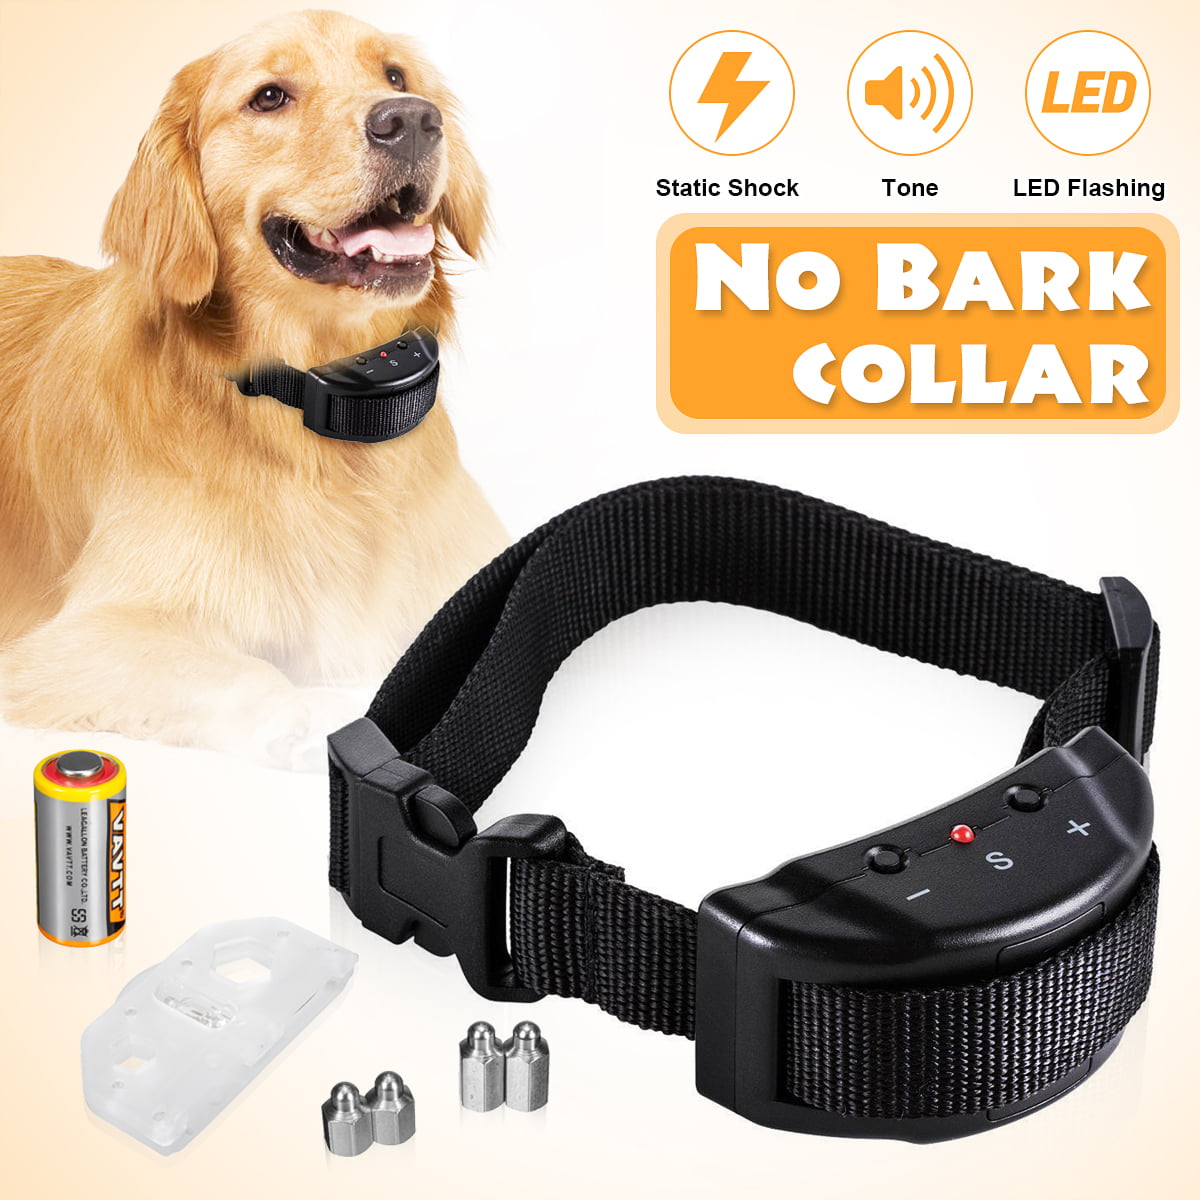 Anti Bark Collar with Sound and Vibration POP VIEW Dog Bark Collar for Small Large Dogs Medium Barking Control Training Collar No Shock Harmless & Humane